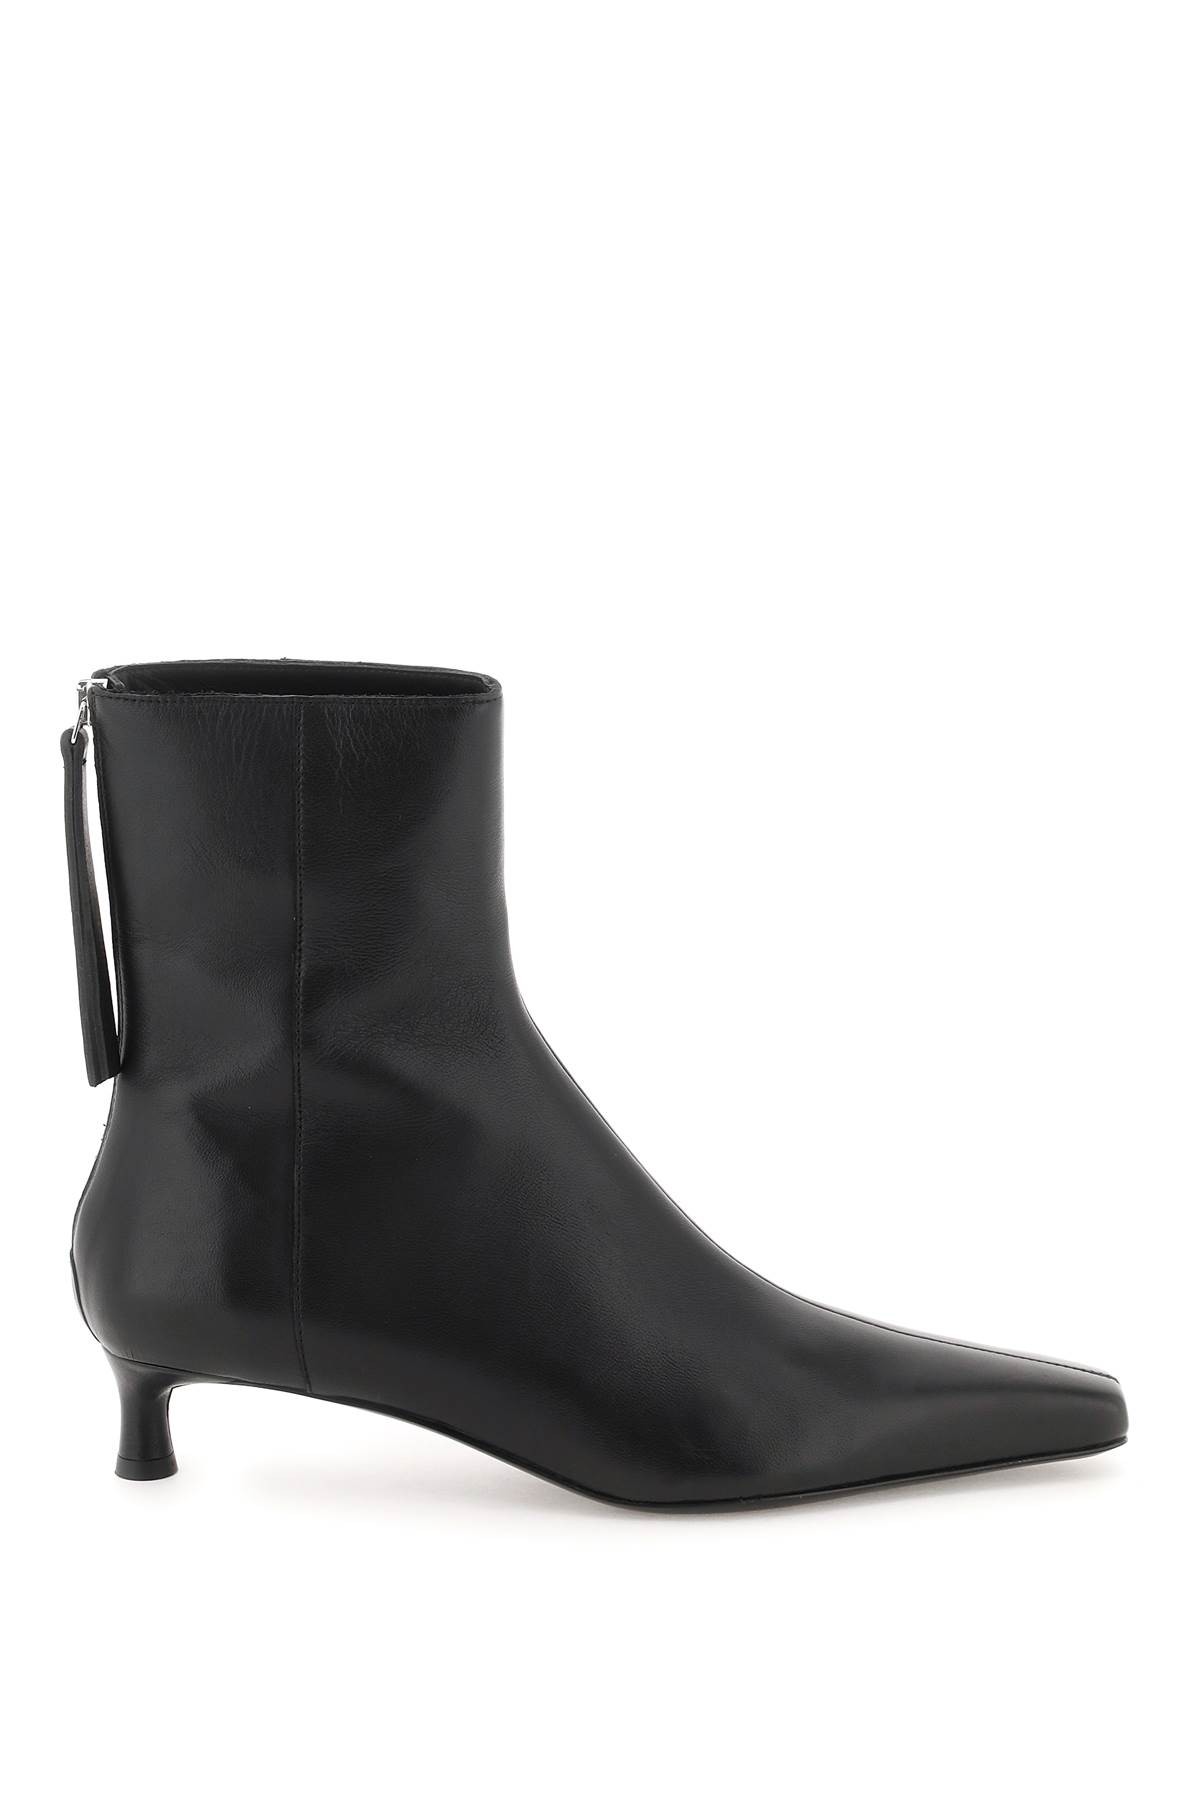 By Malene Birger micella Nappa Leather Ankle Boots